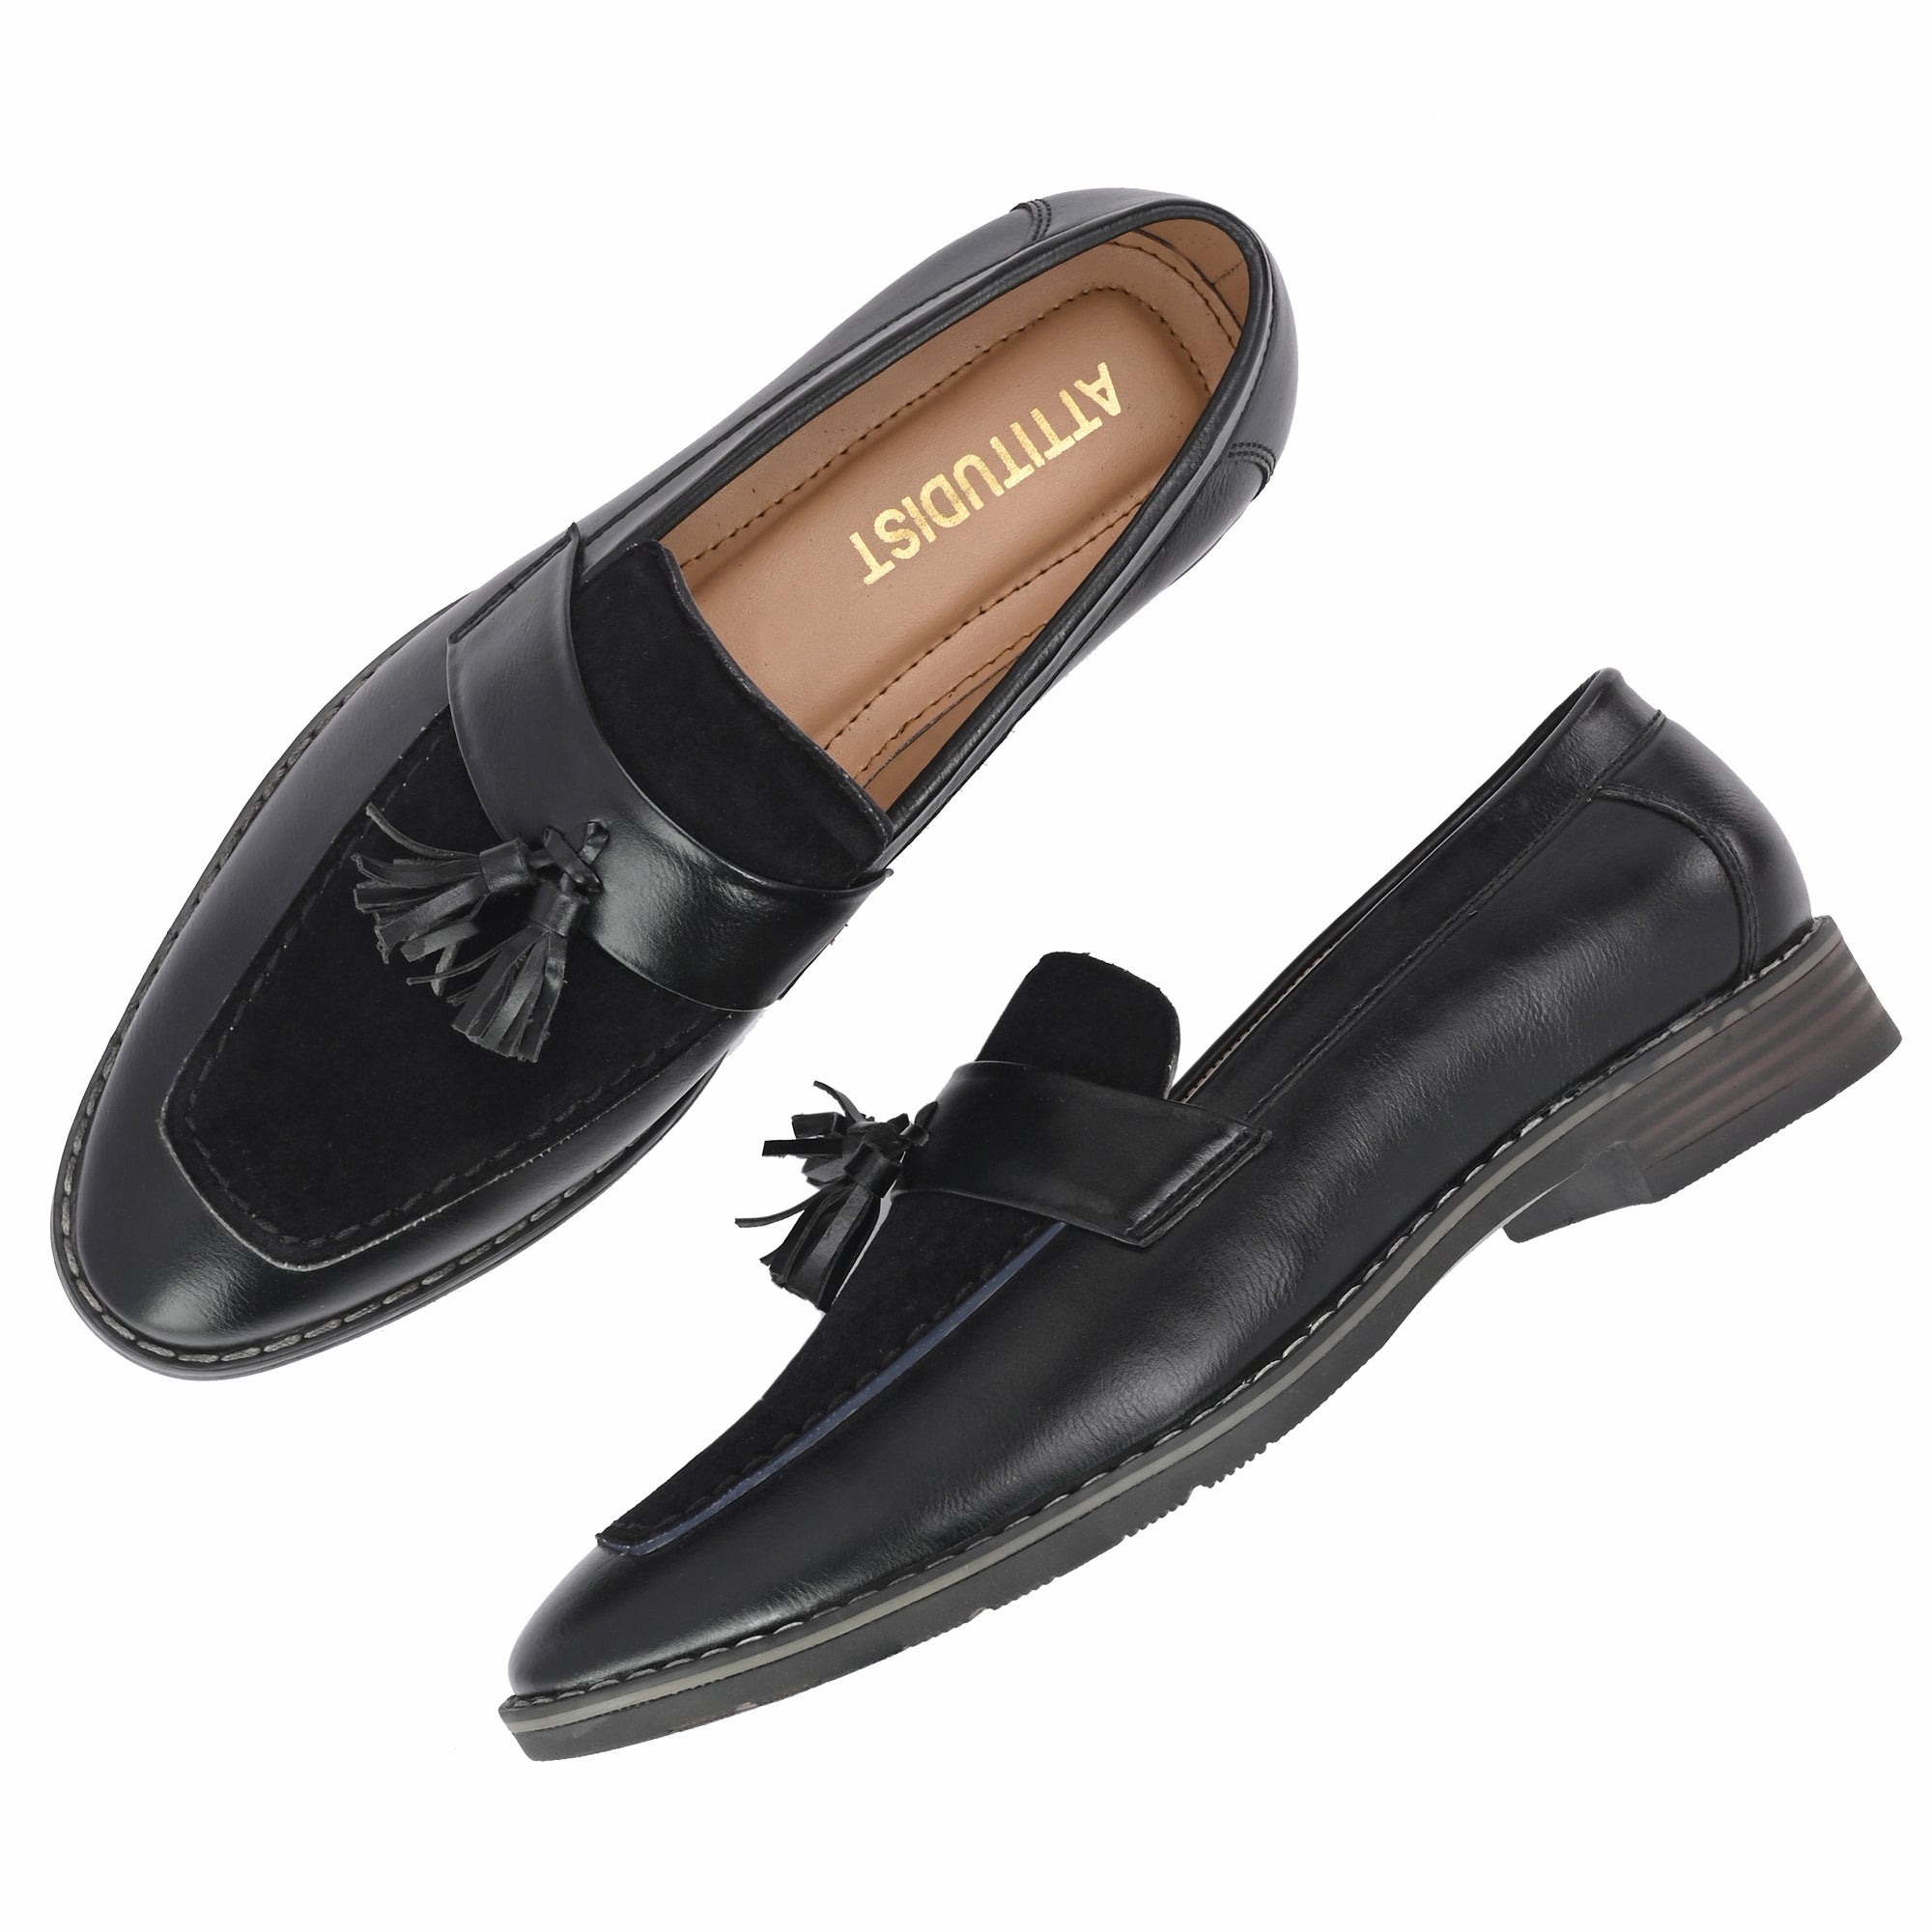 black-loafers-attitudist-shoes-for-men-with-tassel-sp1a